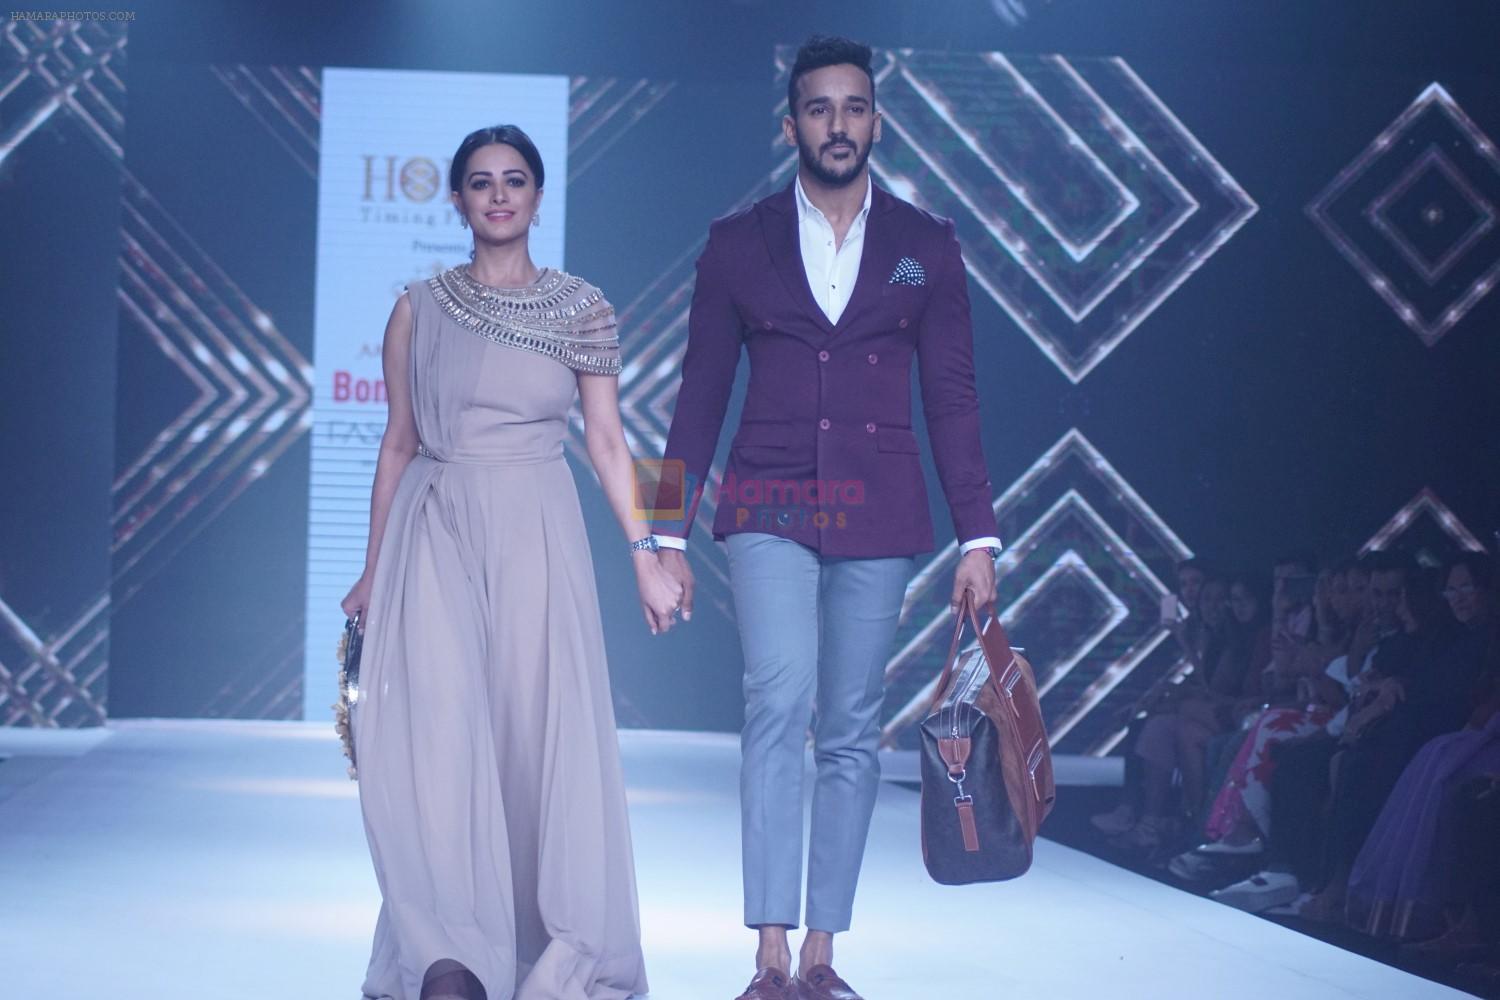 Anita Hassanandani & Rohit Reddy Showstopper For Designer Asif Merchant (Horra) At Bombay Times Fashion Week on 1st April 2018